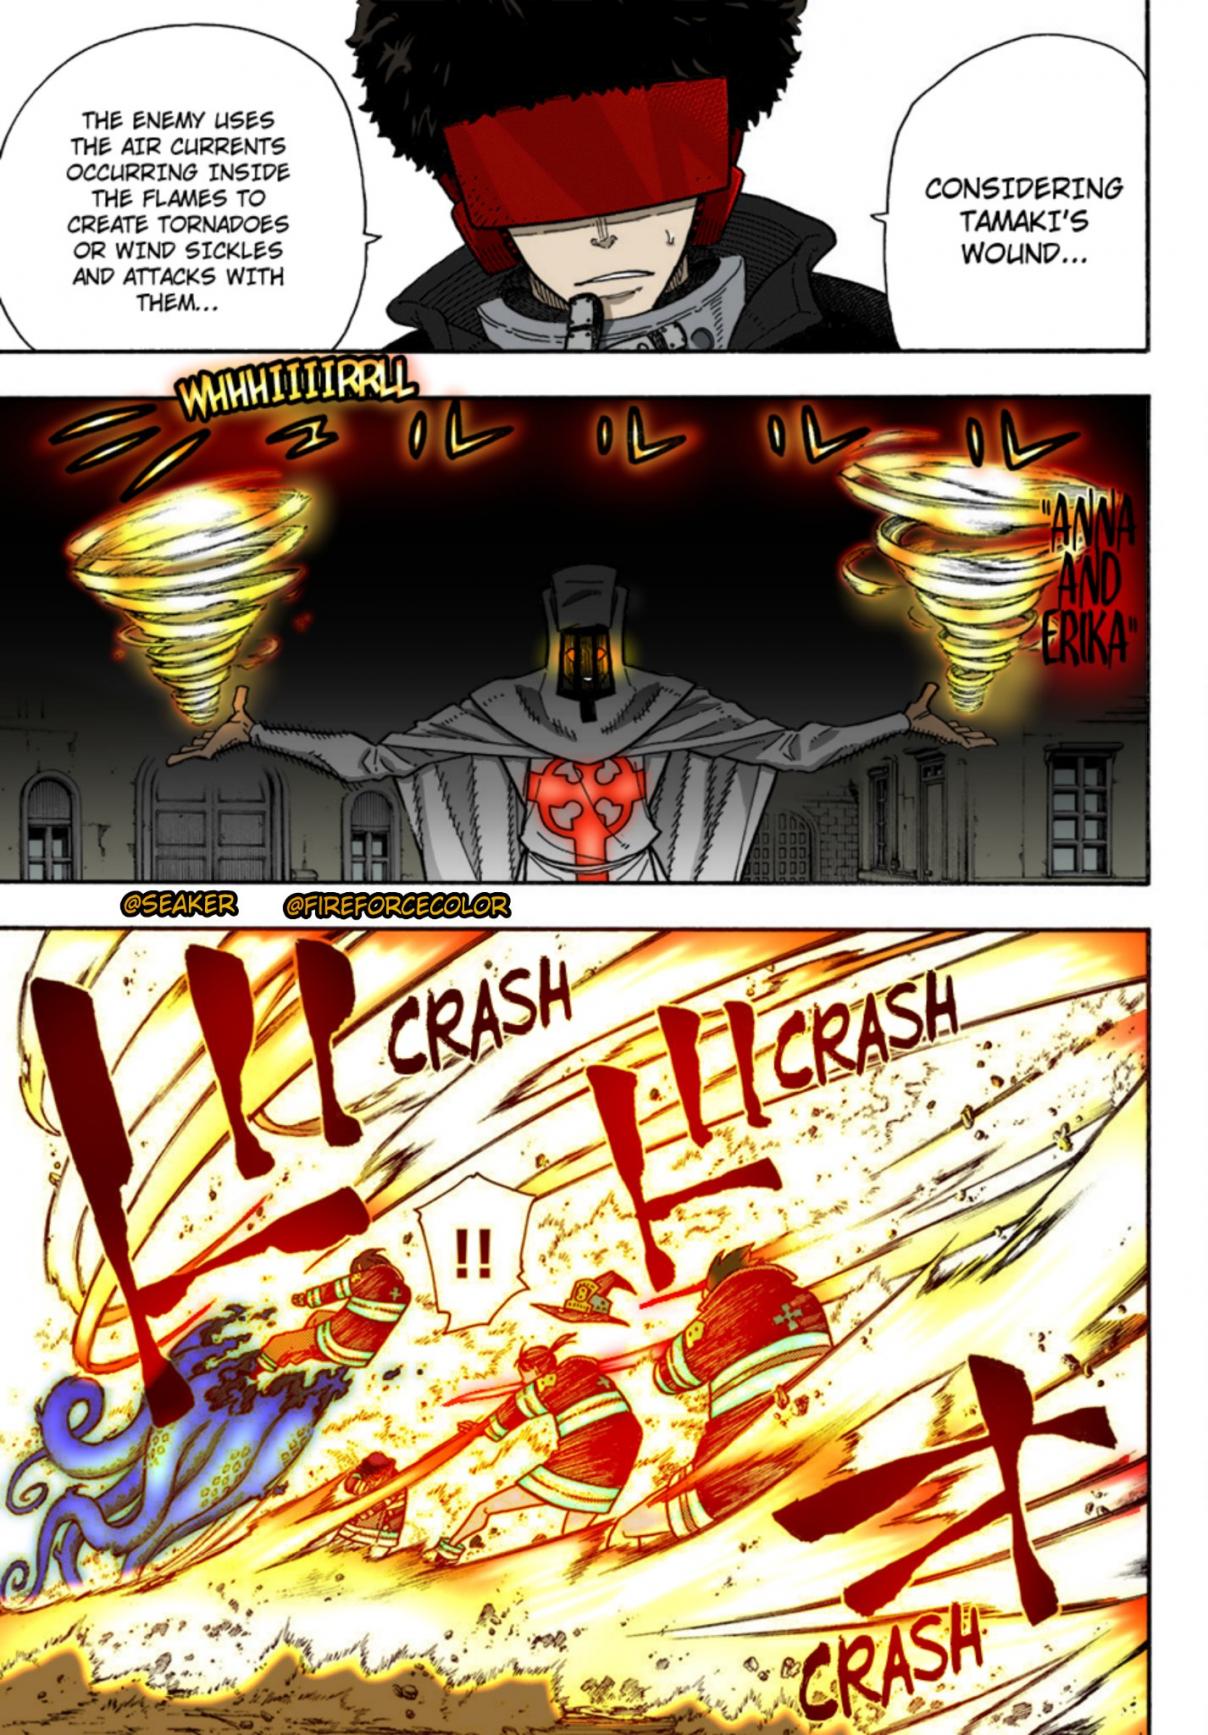 Enen no Shouboutai (Fan Colored) Ch. 186 A Chance Meeting With an Old Enemy